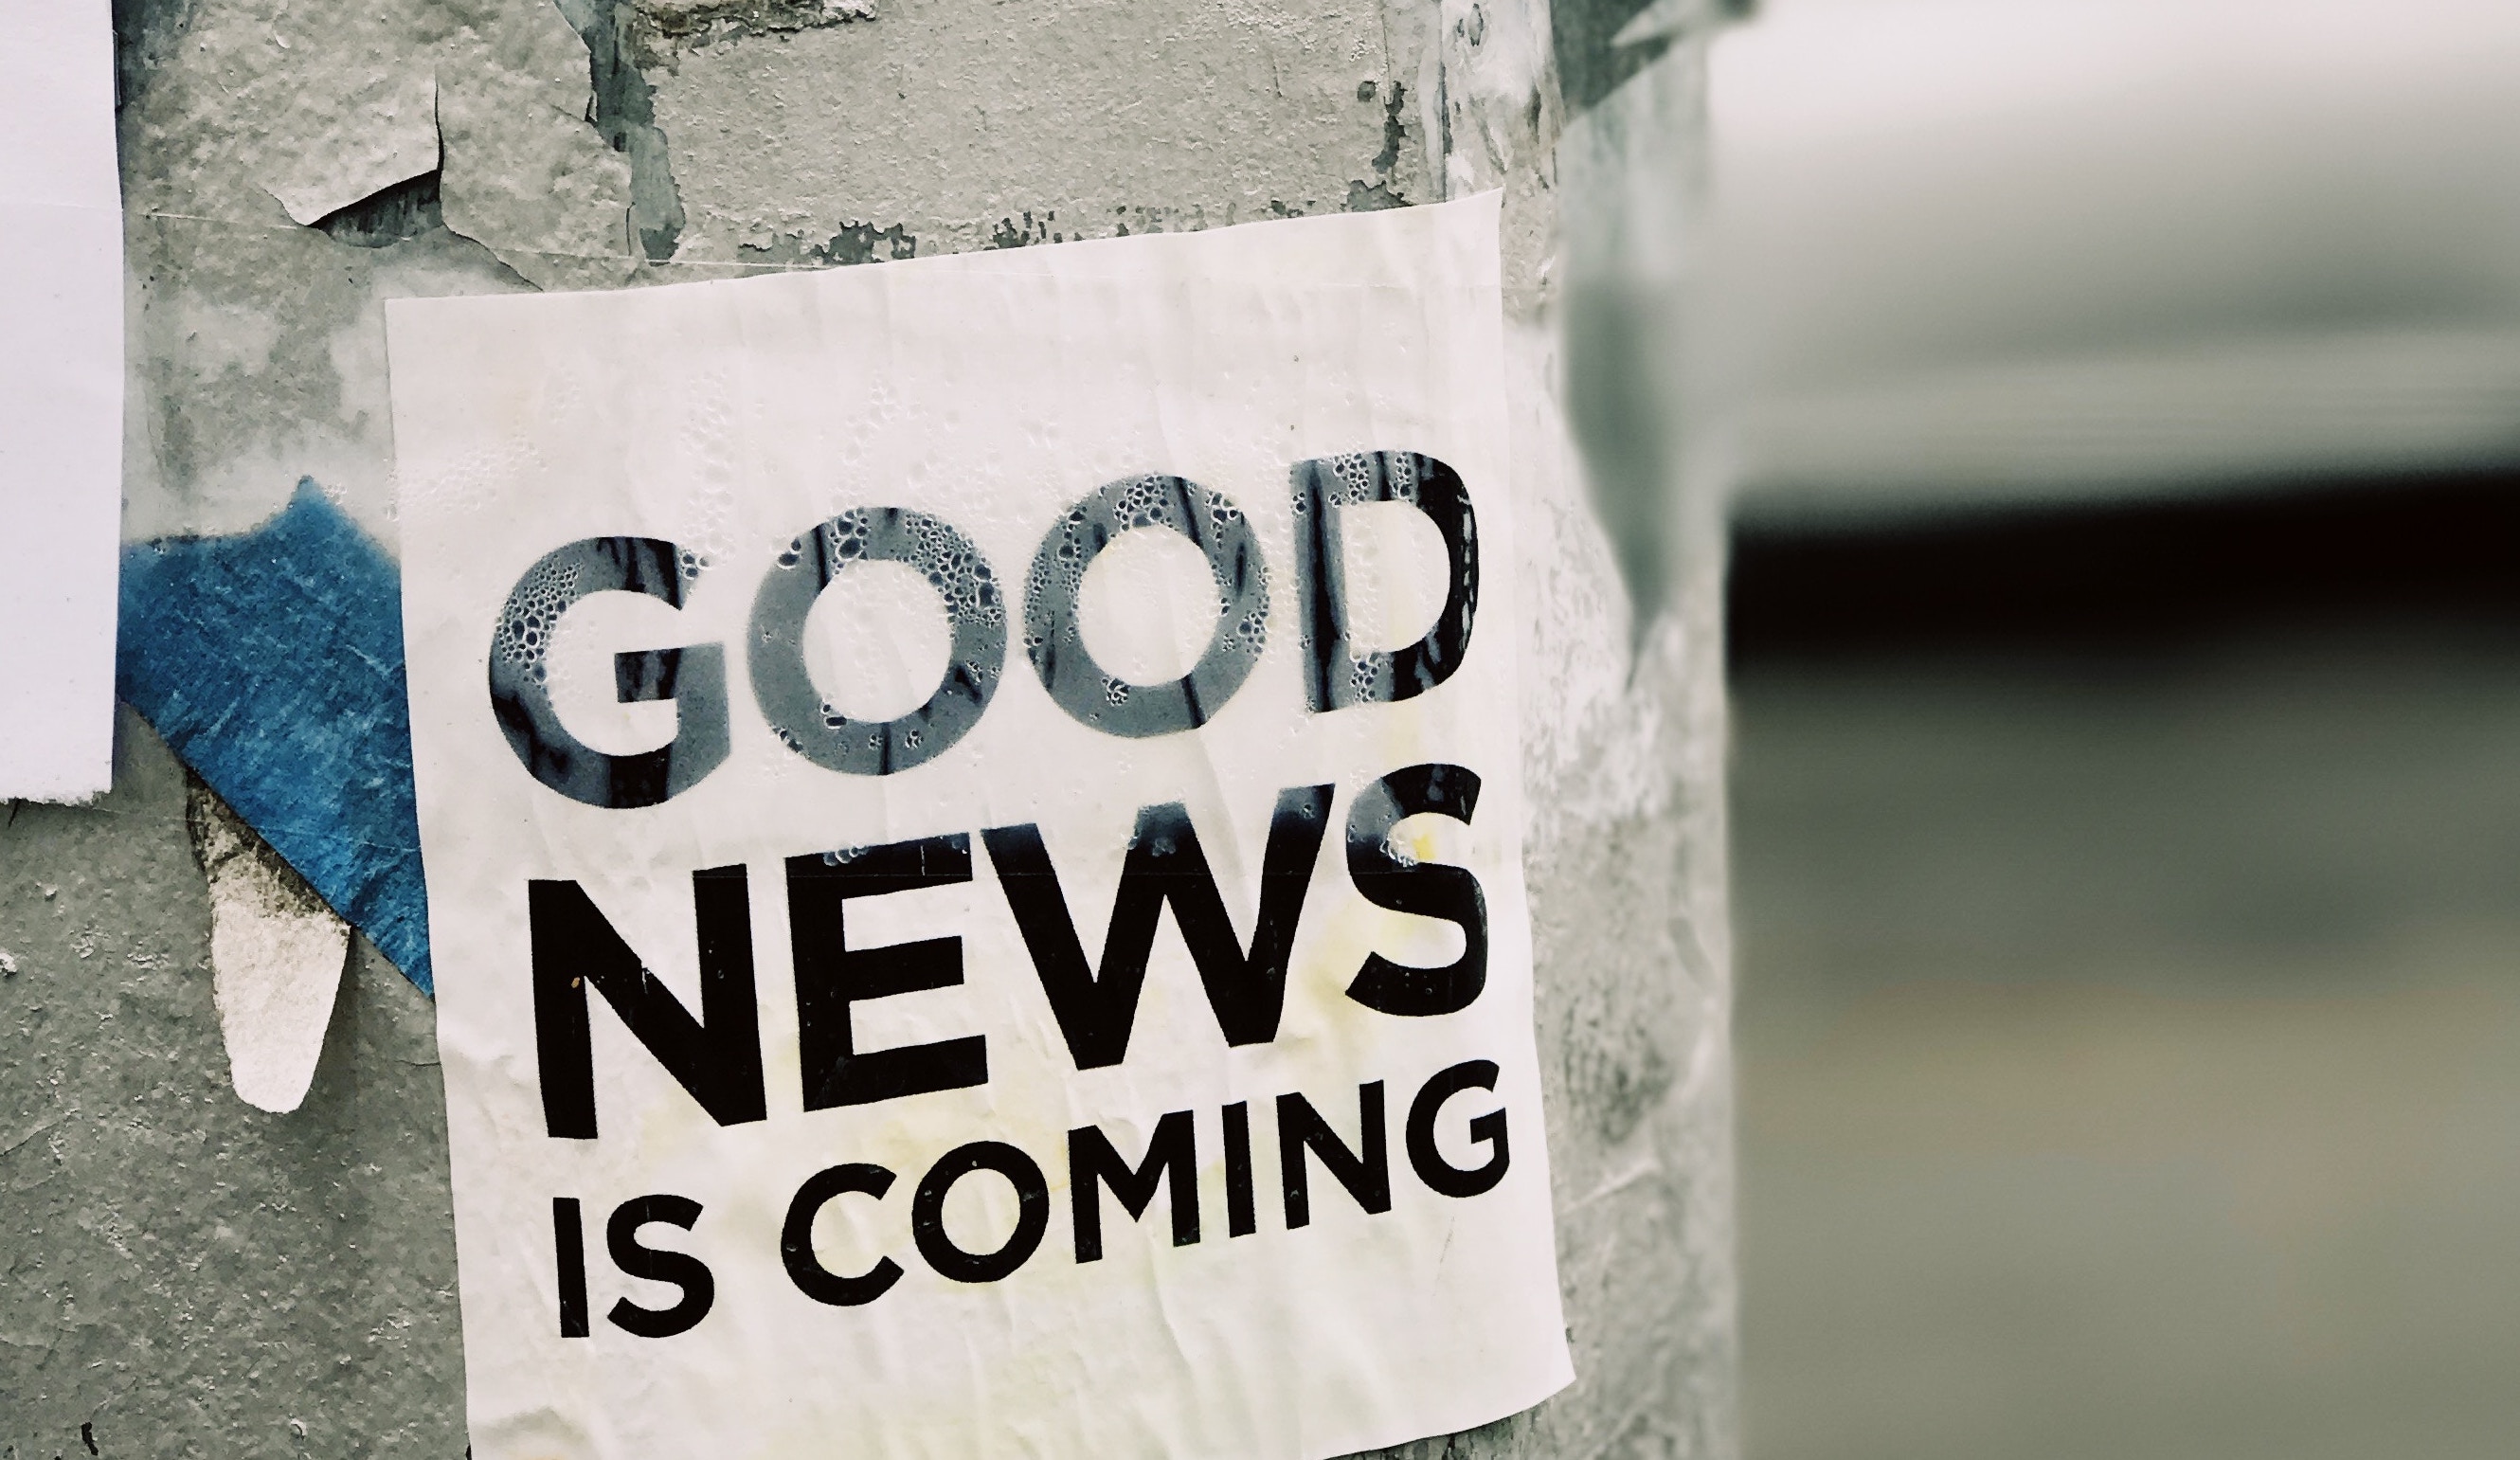 Good News is Coming